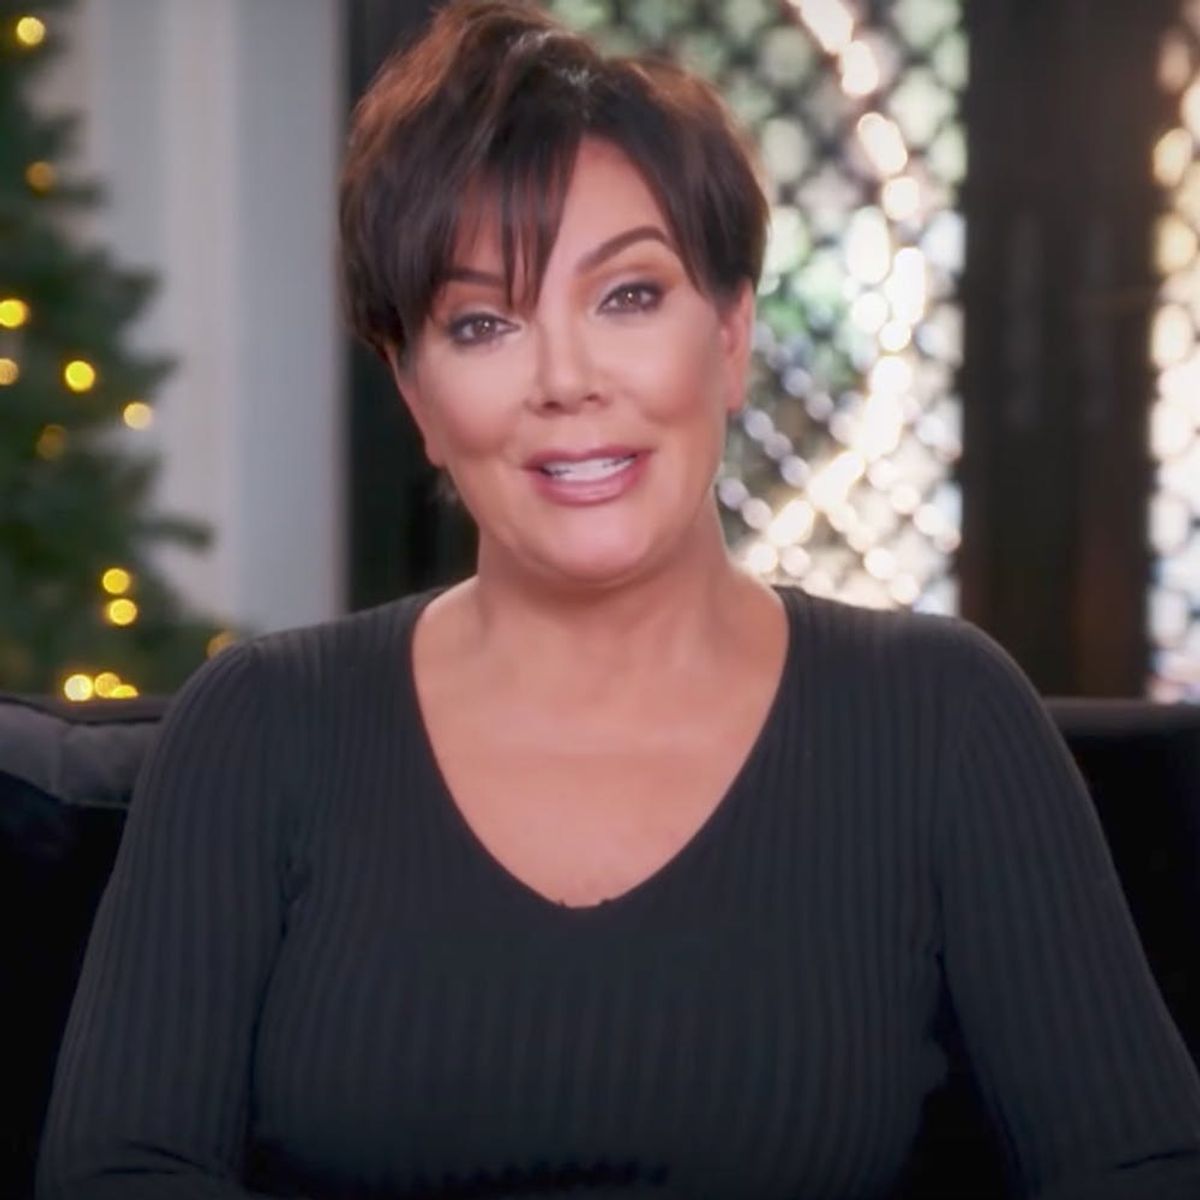 Keeping Up With the Kardashians Recap: Kim’s a Christmas Monster